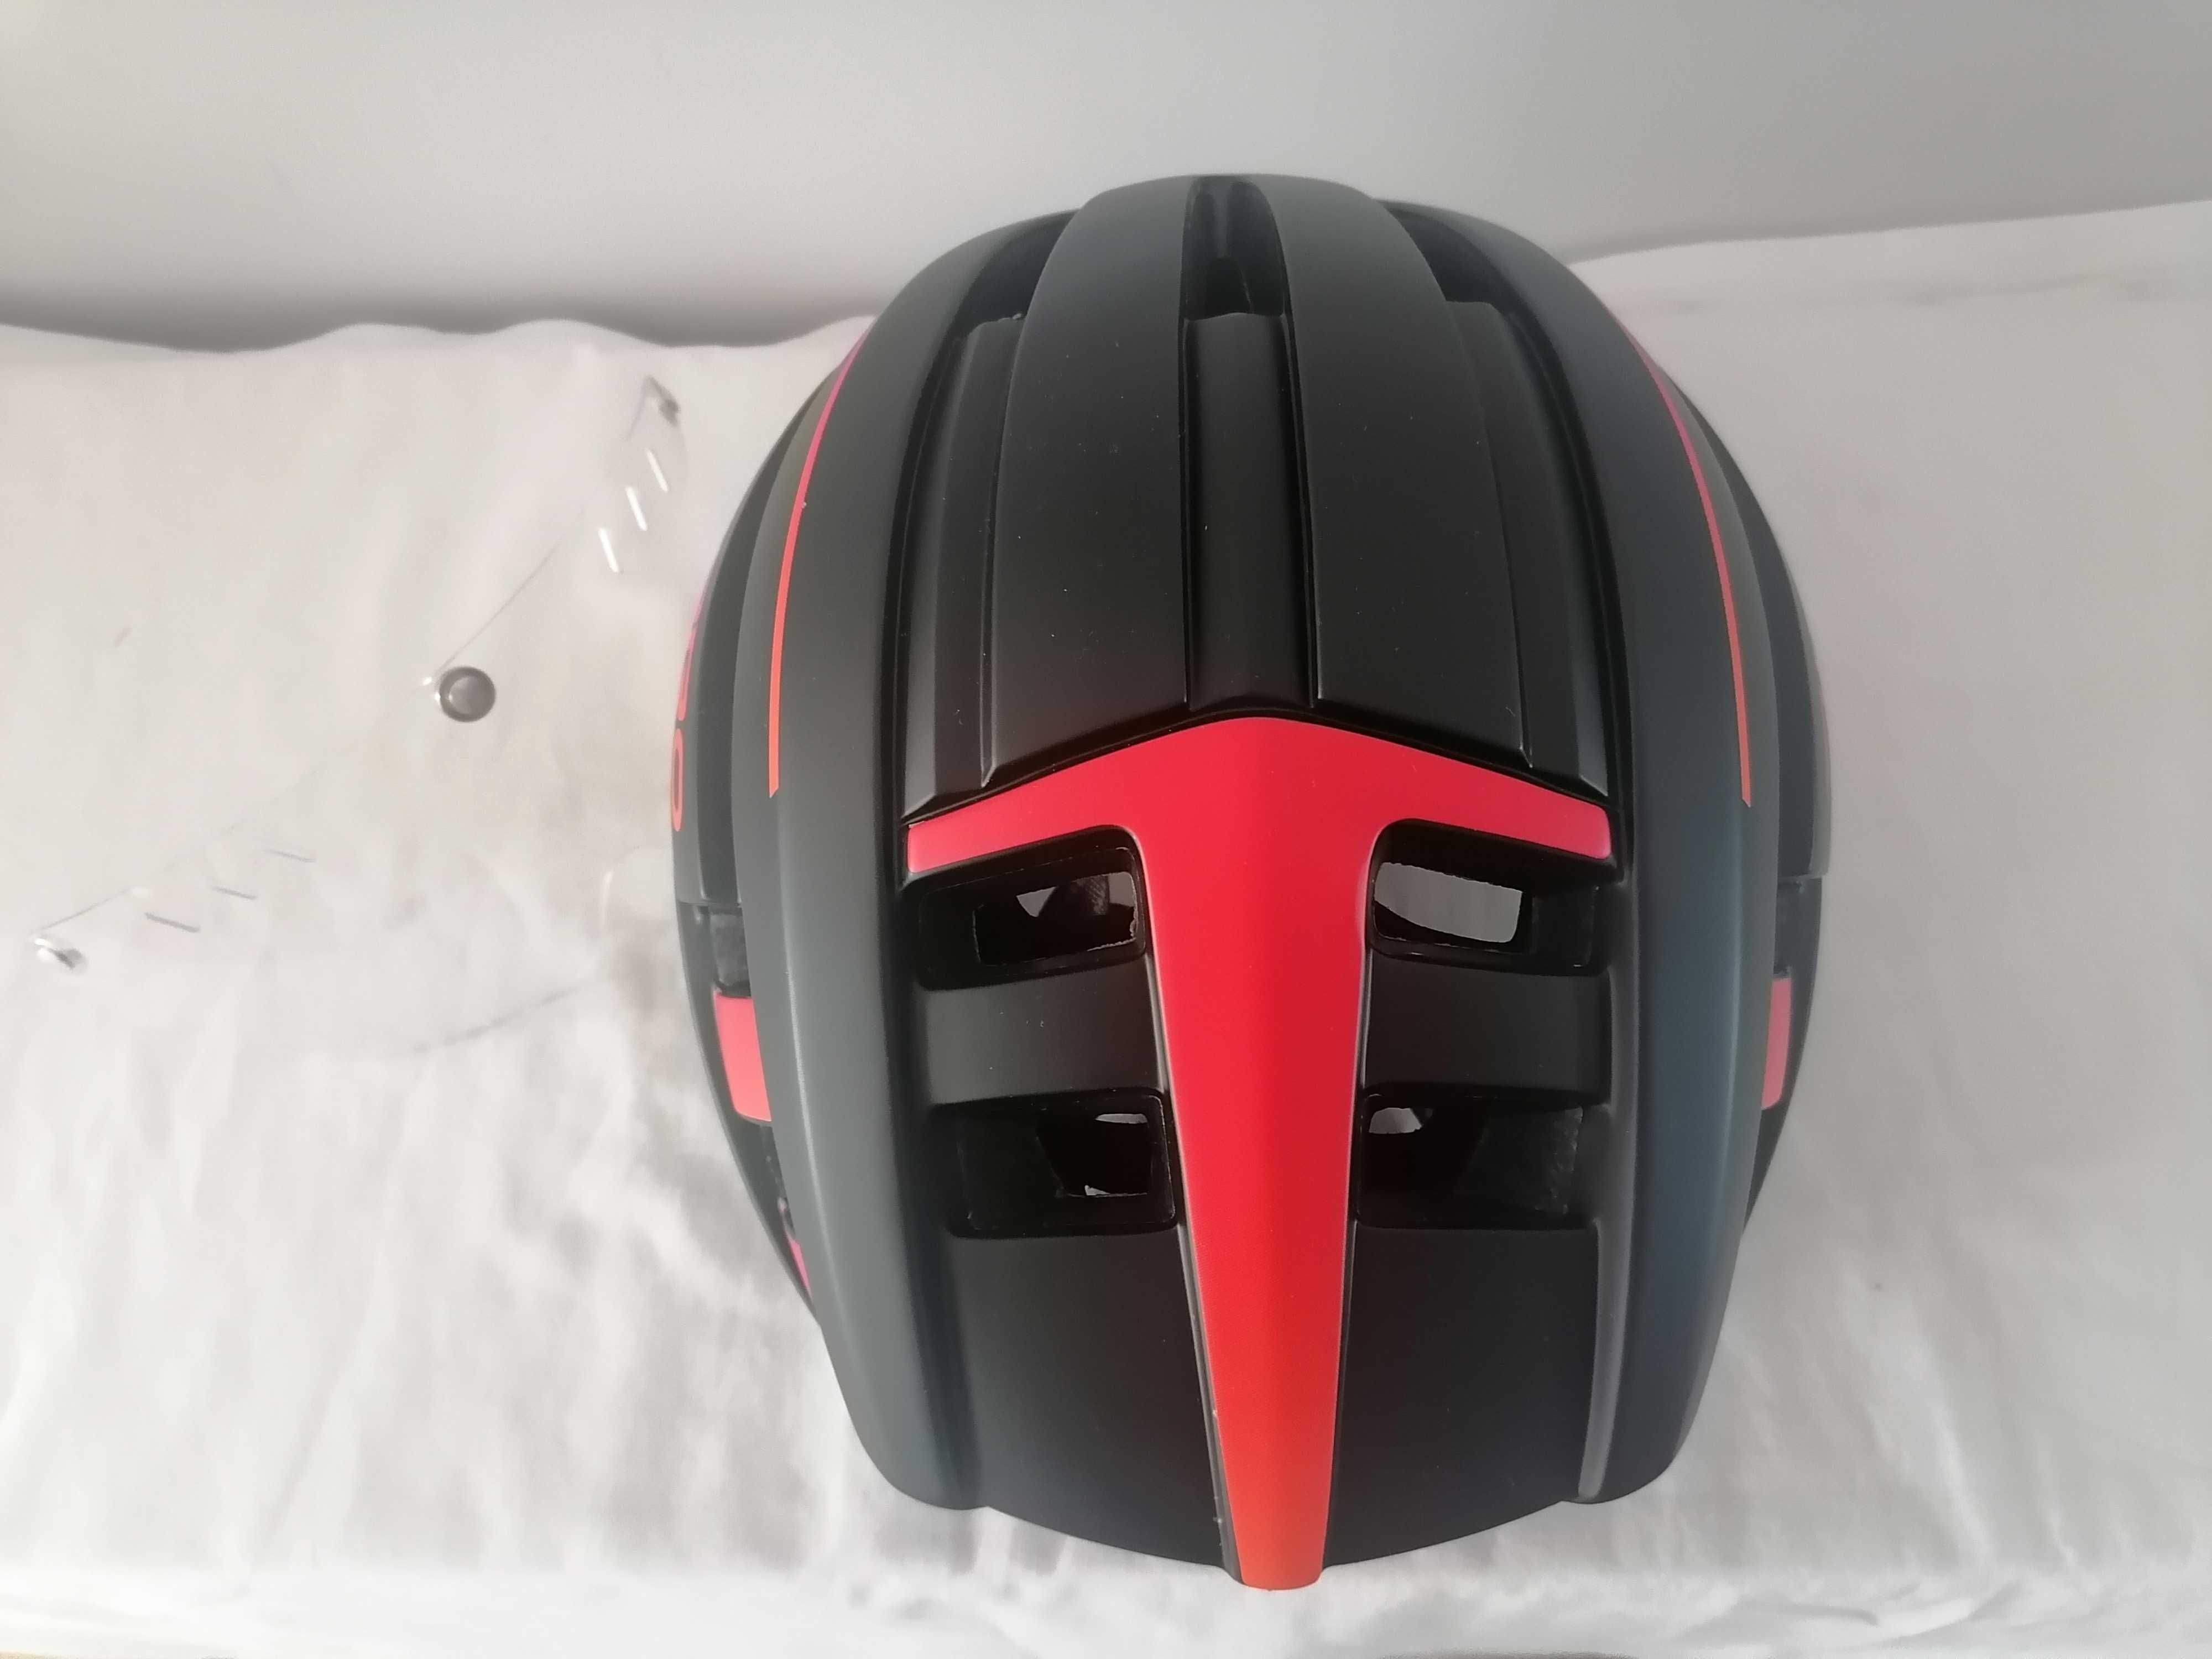 Kask rowerowy Diridero Rosso Nuovo Led L 57-62cm